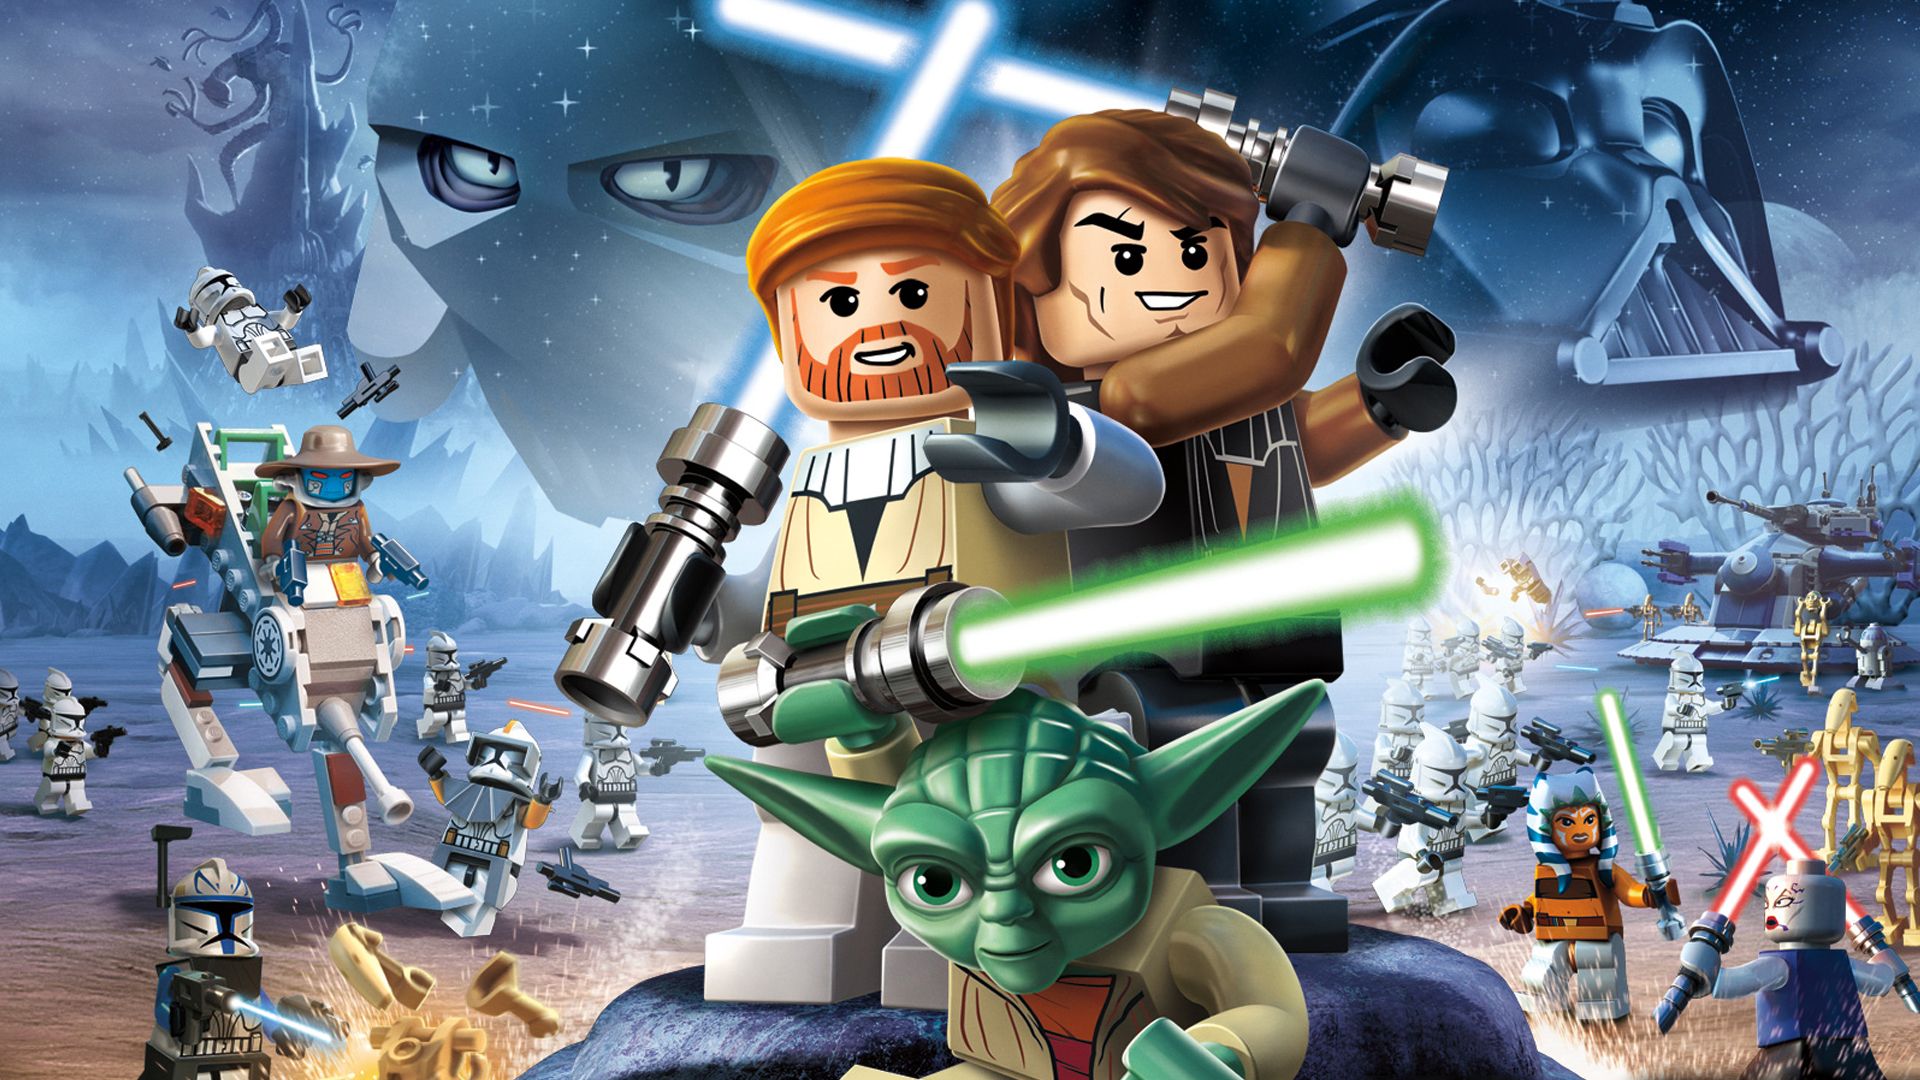 new lego star wars game download